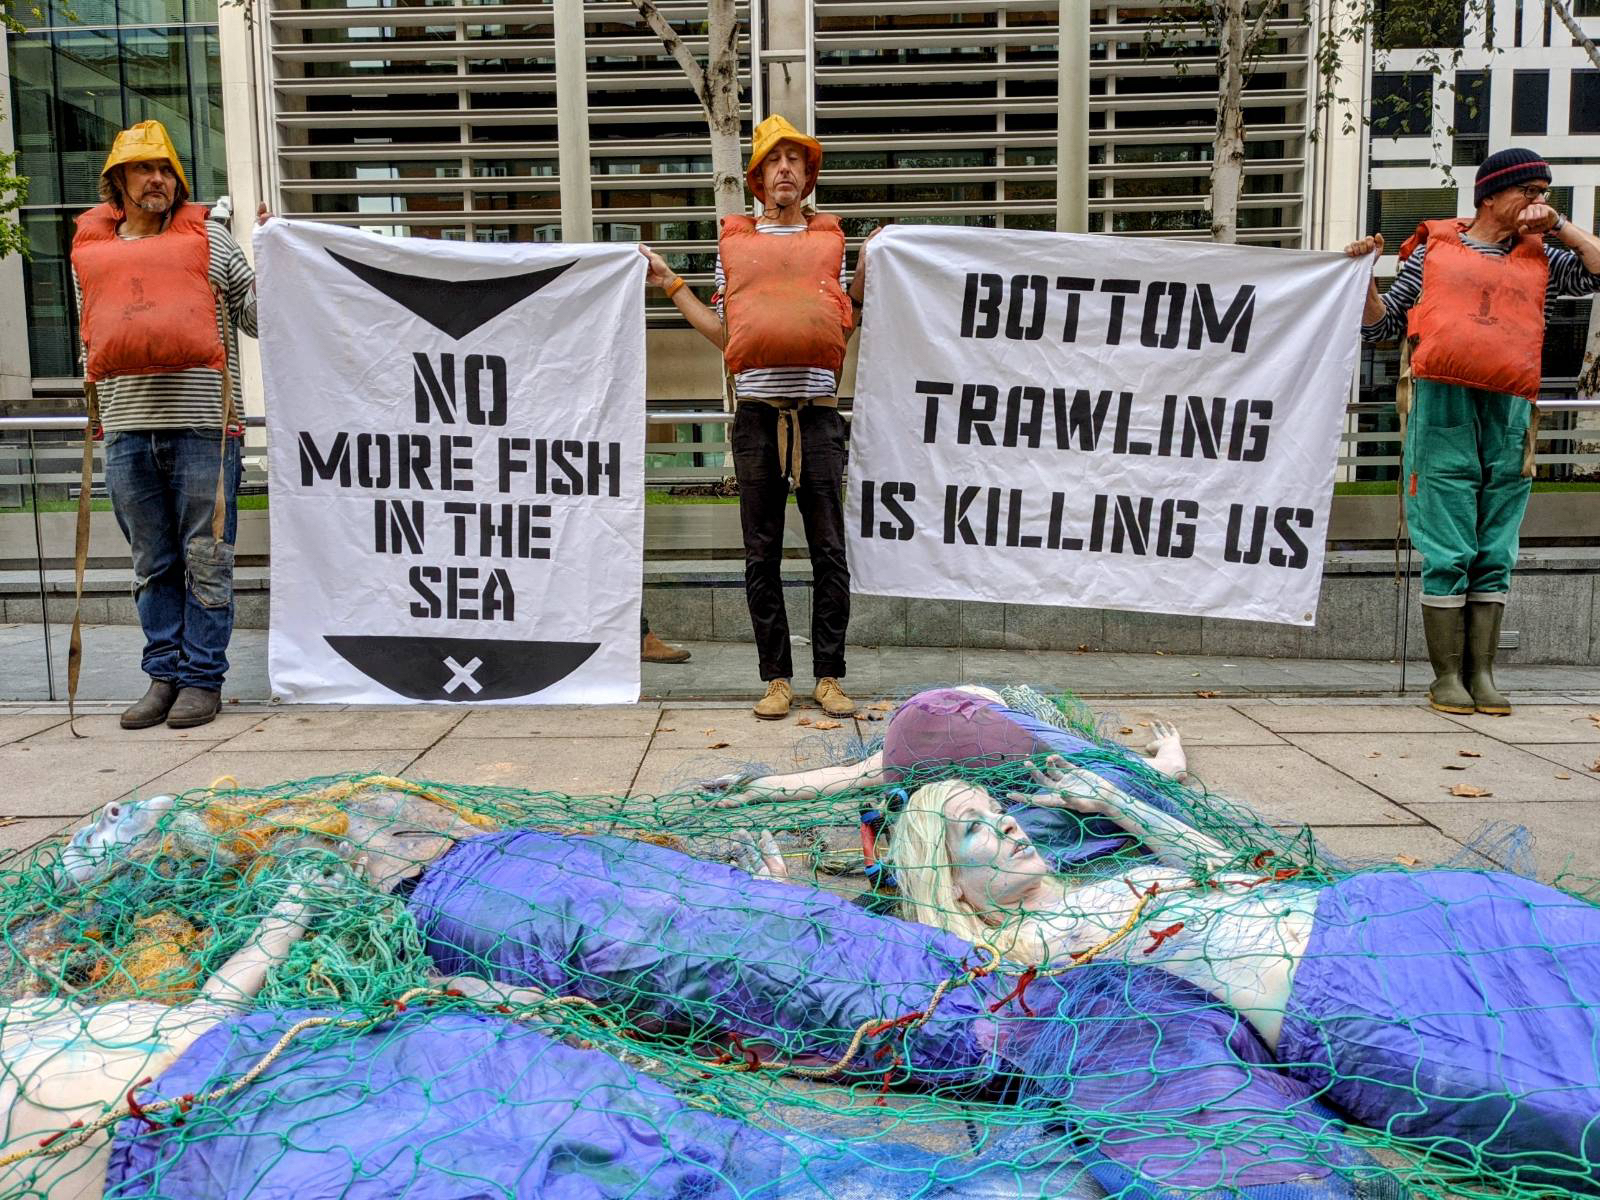 Rebels in life jackets hold sign about bottom trawling killing fish and us while below mermaids lie lifeless in netting